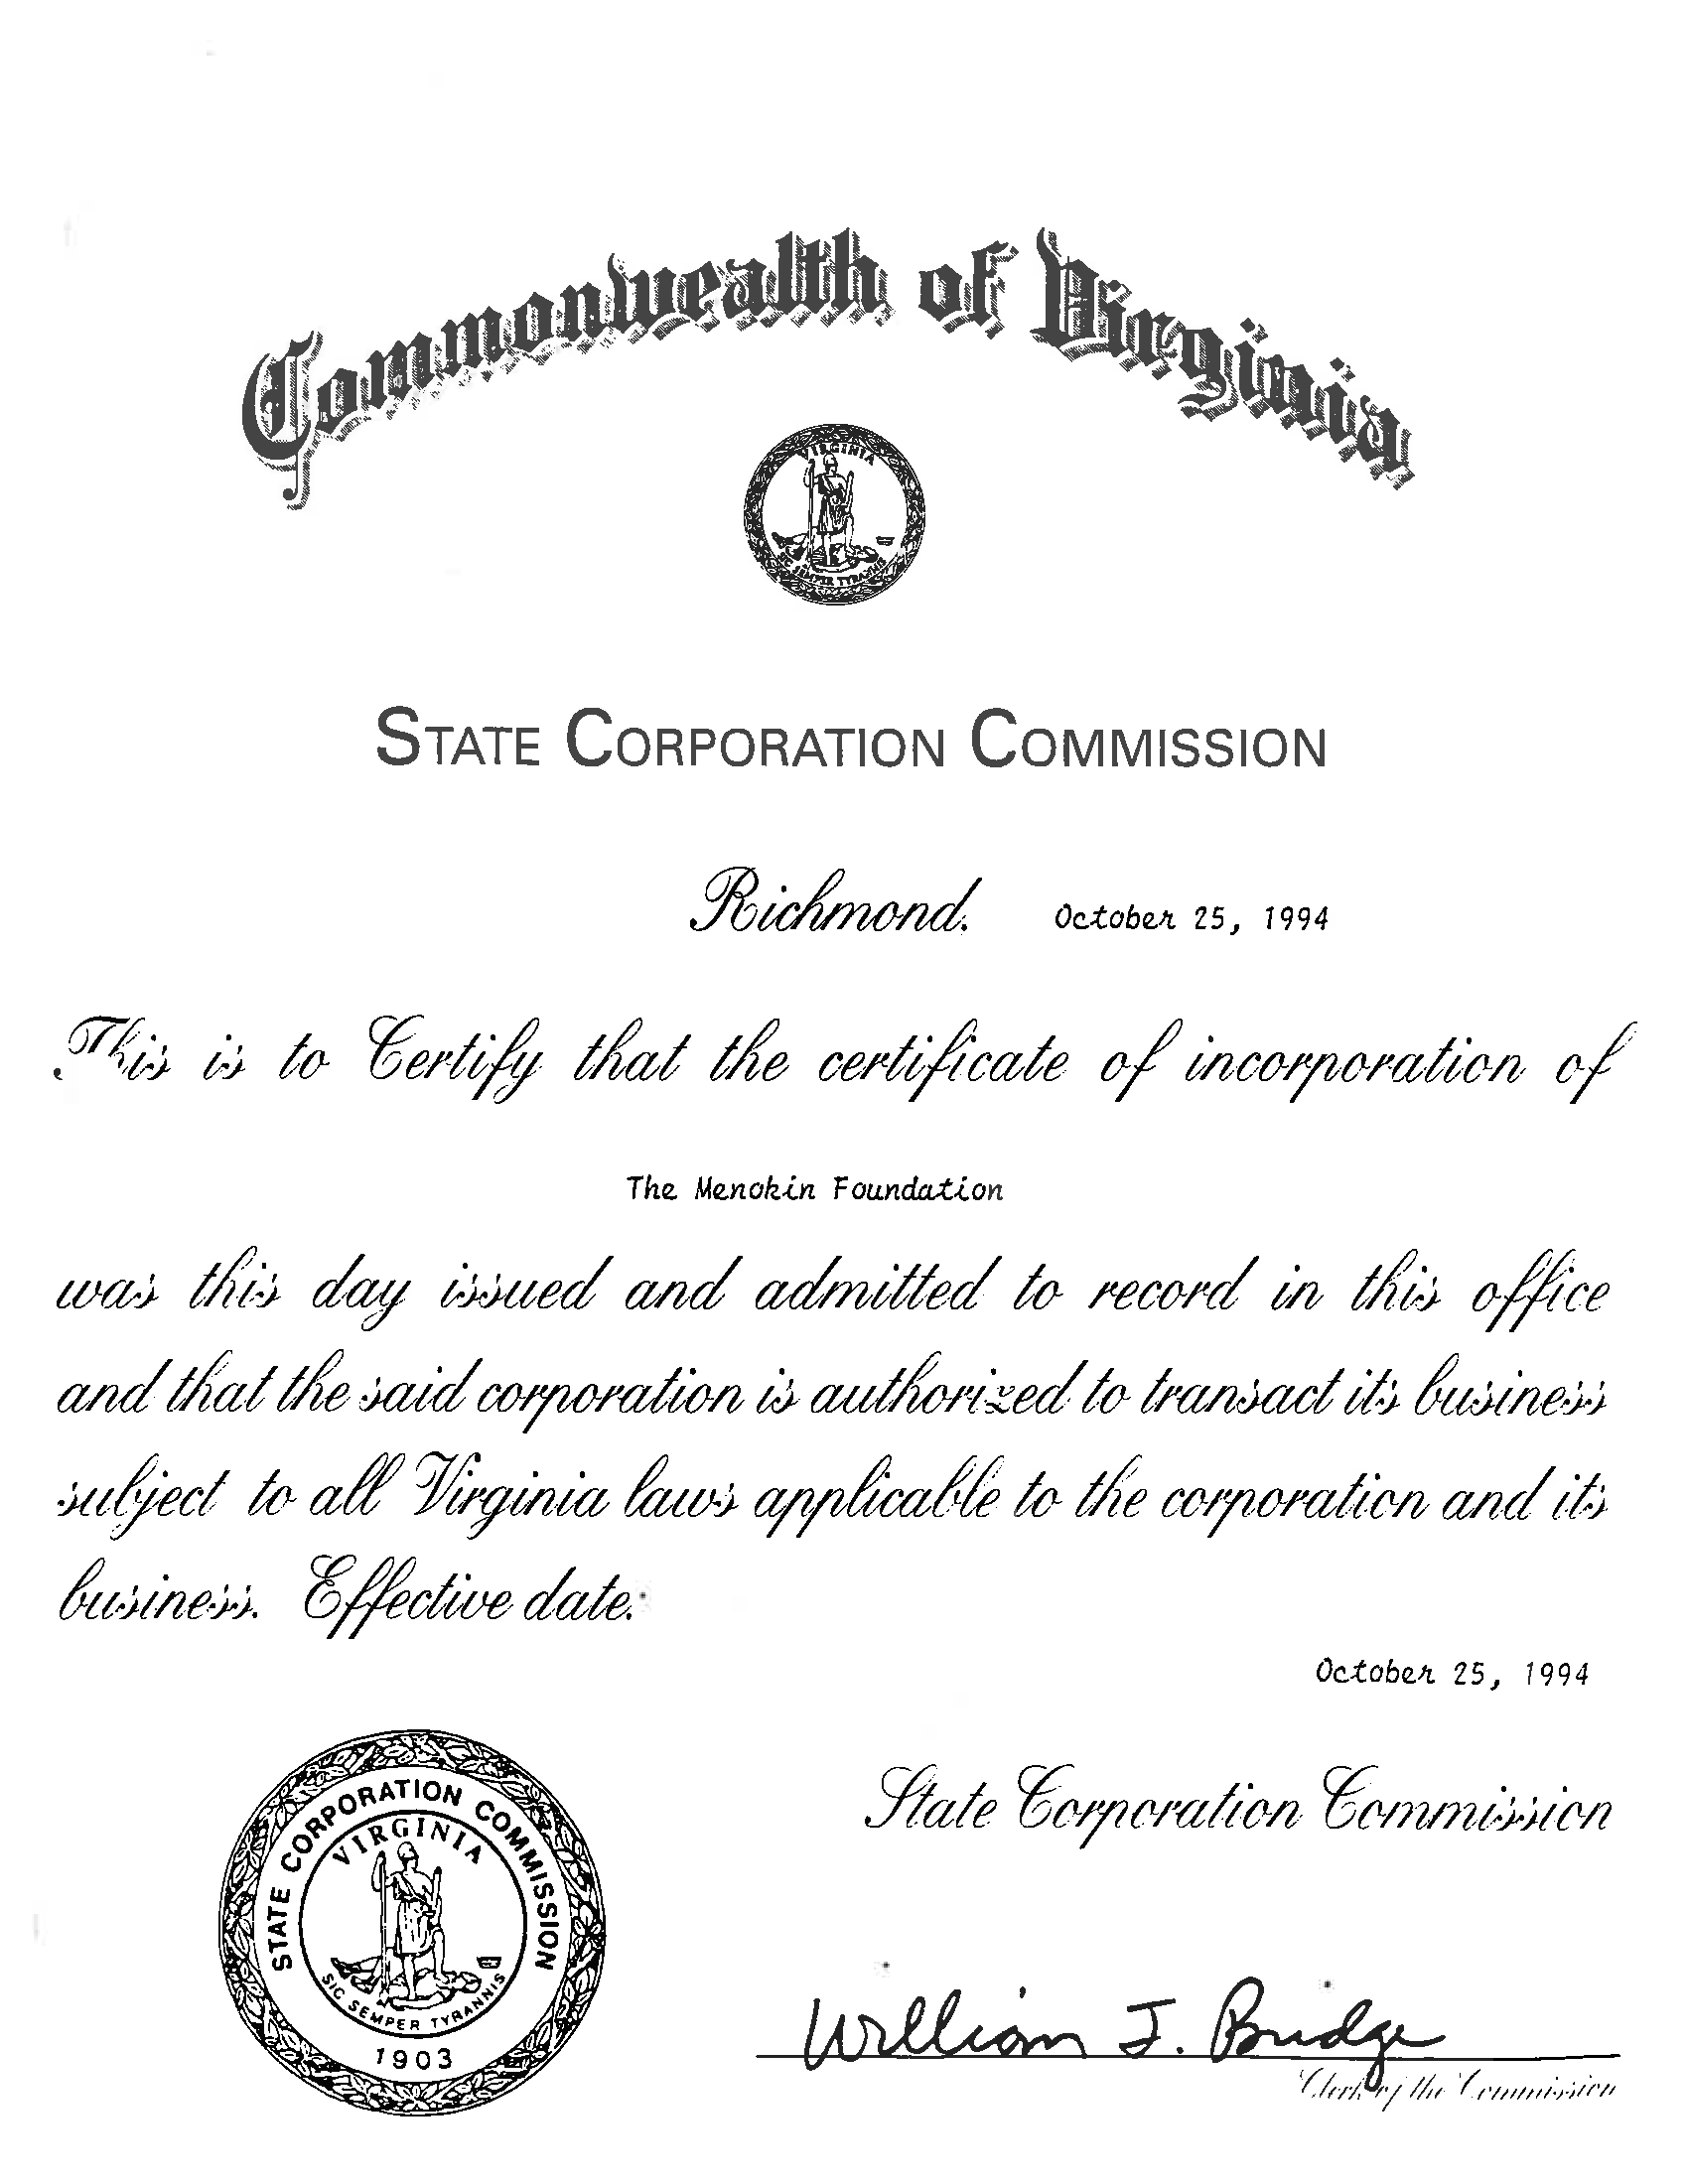 Menokin Foundation Articles of Incorporation_Page_01.png